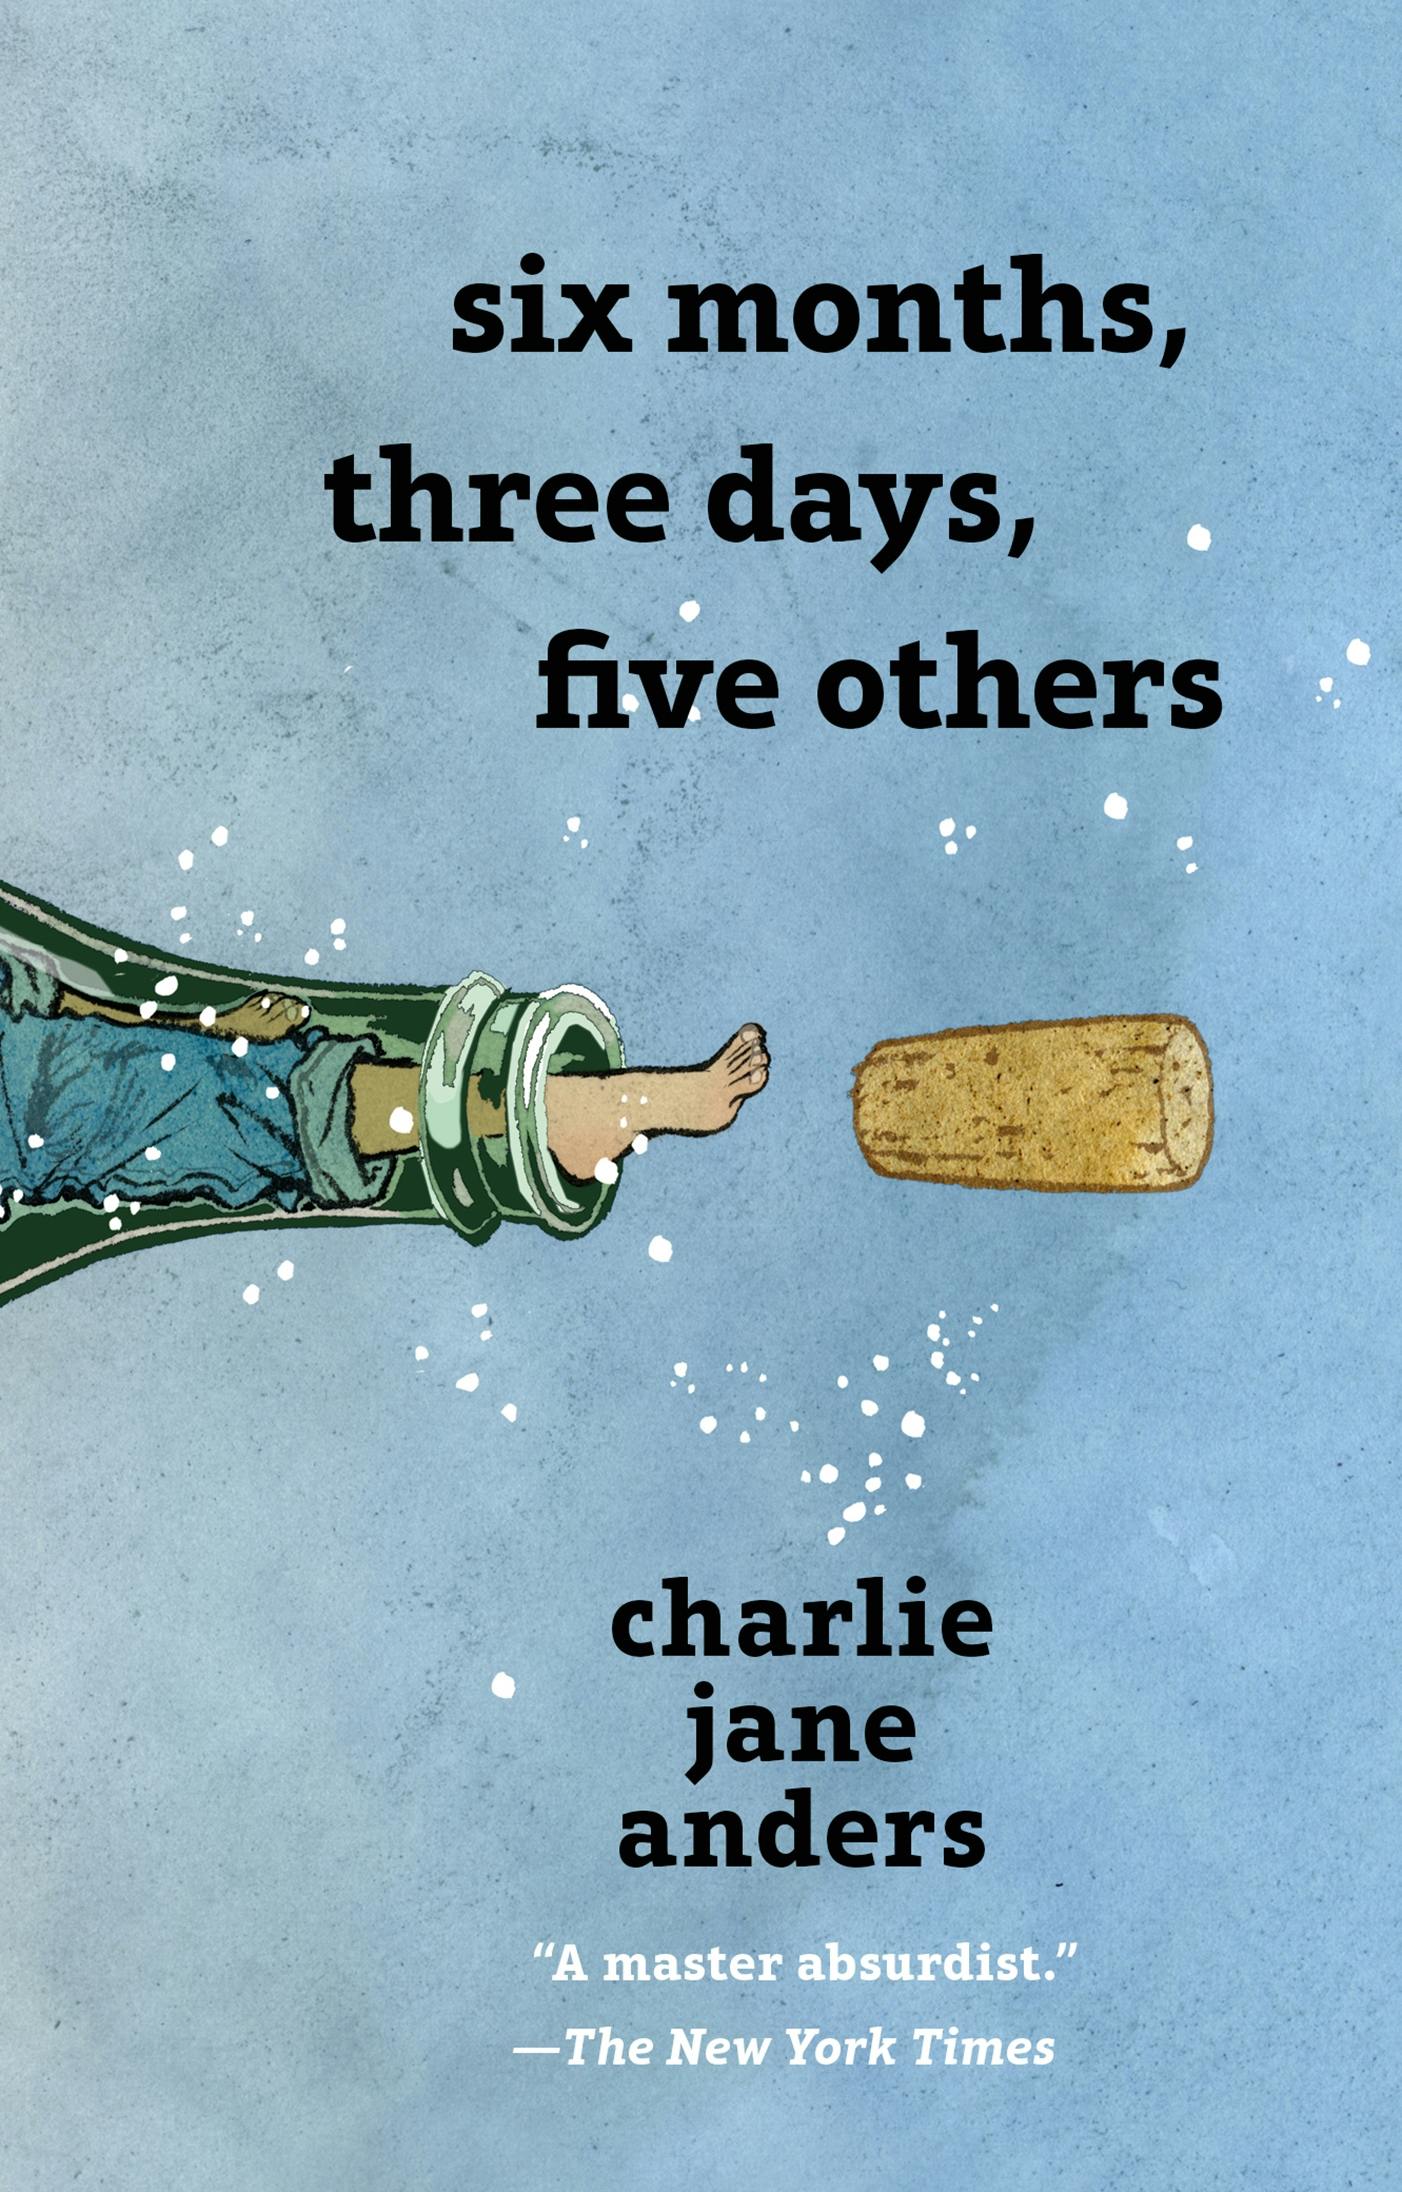 Cover for the book titled as: Six Months, Three Days, Five Others